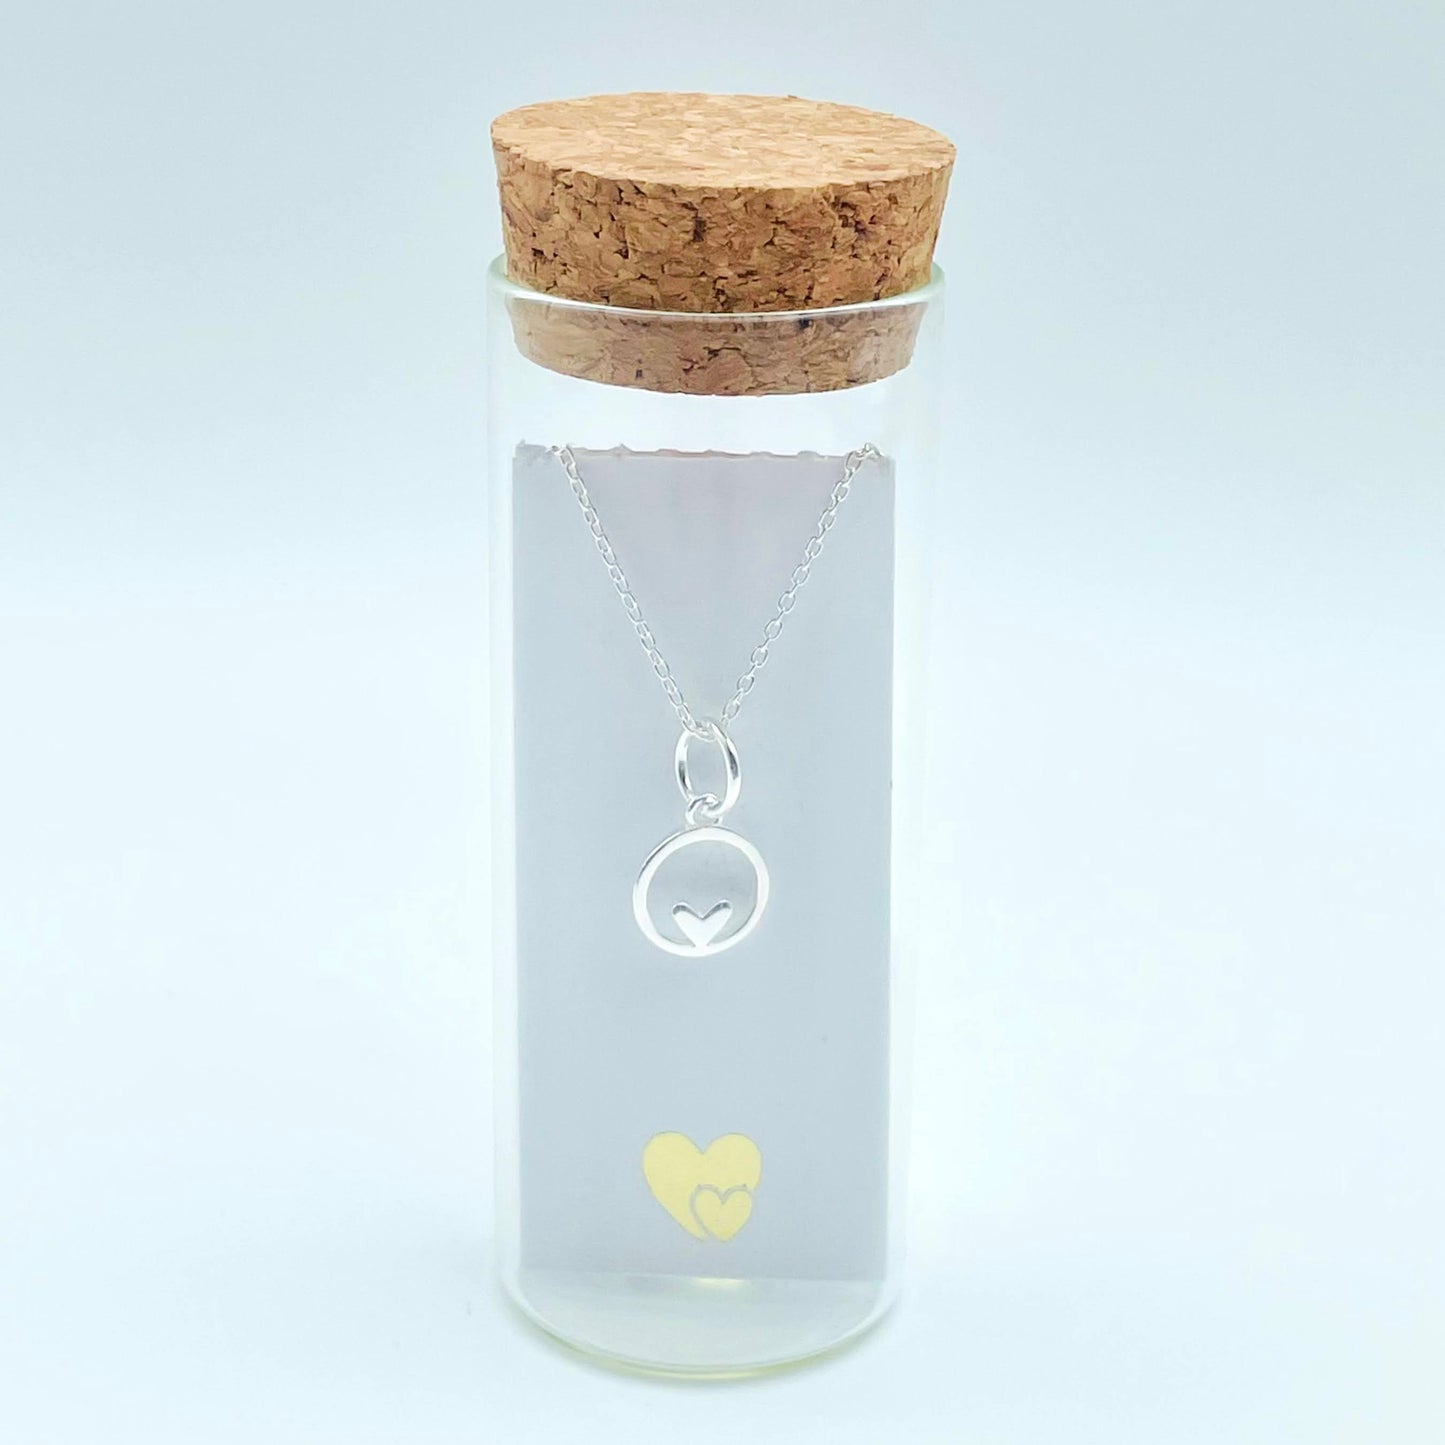 A small sterling silver circle encases a tiny sterling silver heart and is hung from a sterling silver chain. The necklace is placed in a glass bottle which also includes a scroll with a message in your wording. Part of our Message in a Bottle range. Your  pendant includes a luxury gift pouch and eco-friendly packaging